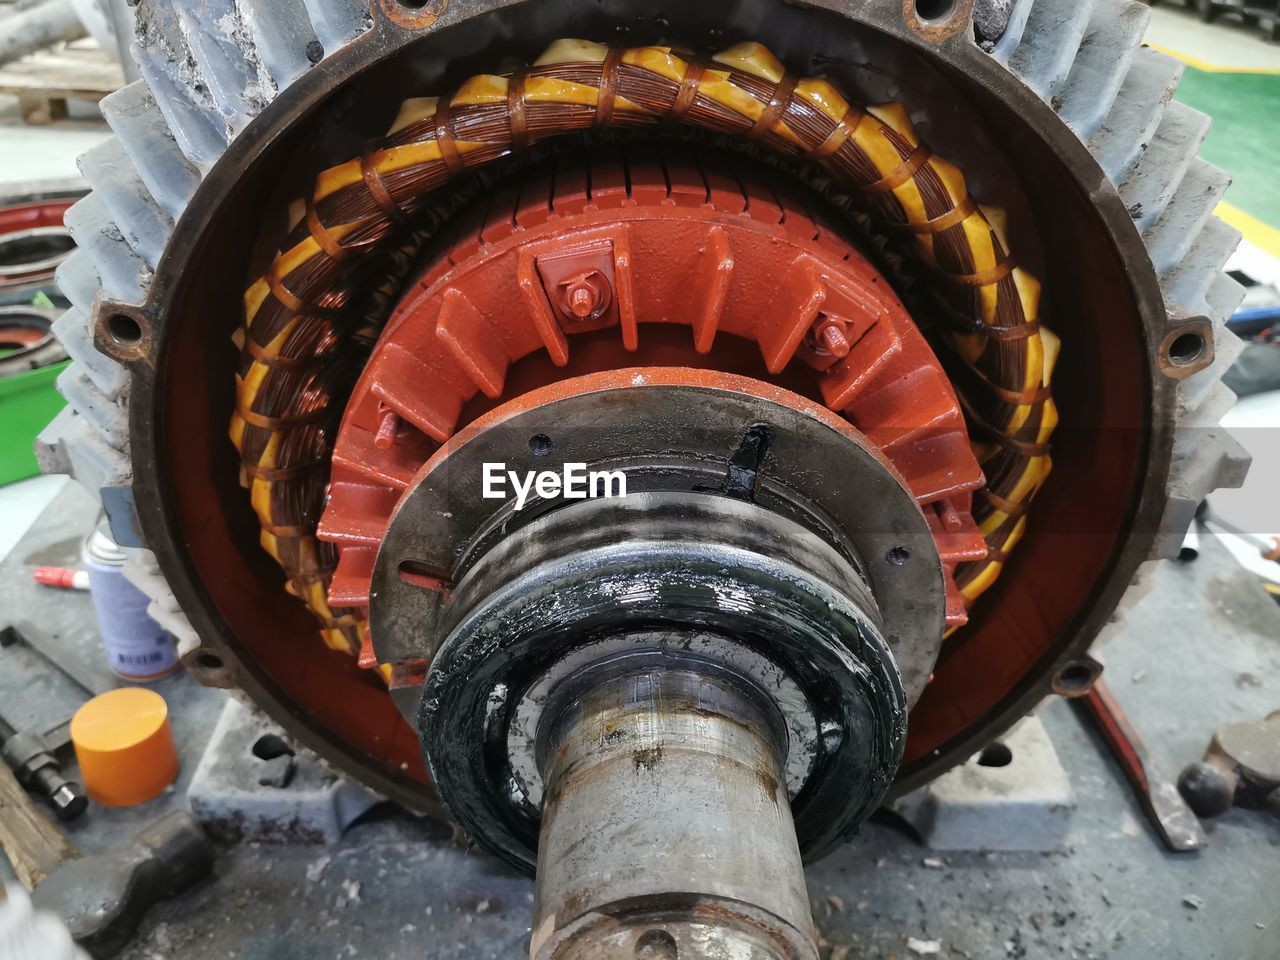 aircraft engine, wheel, industry, metal, engine, automotive tire, no people, transportation, tire, day, high angle view, mode of transportation, machinery